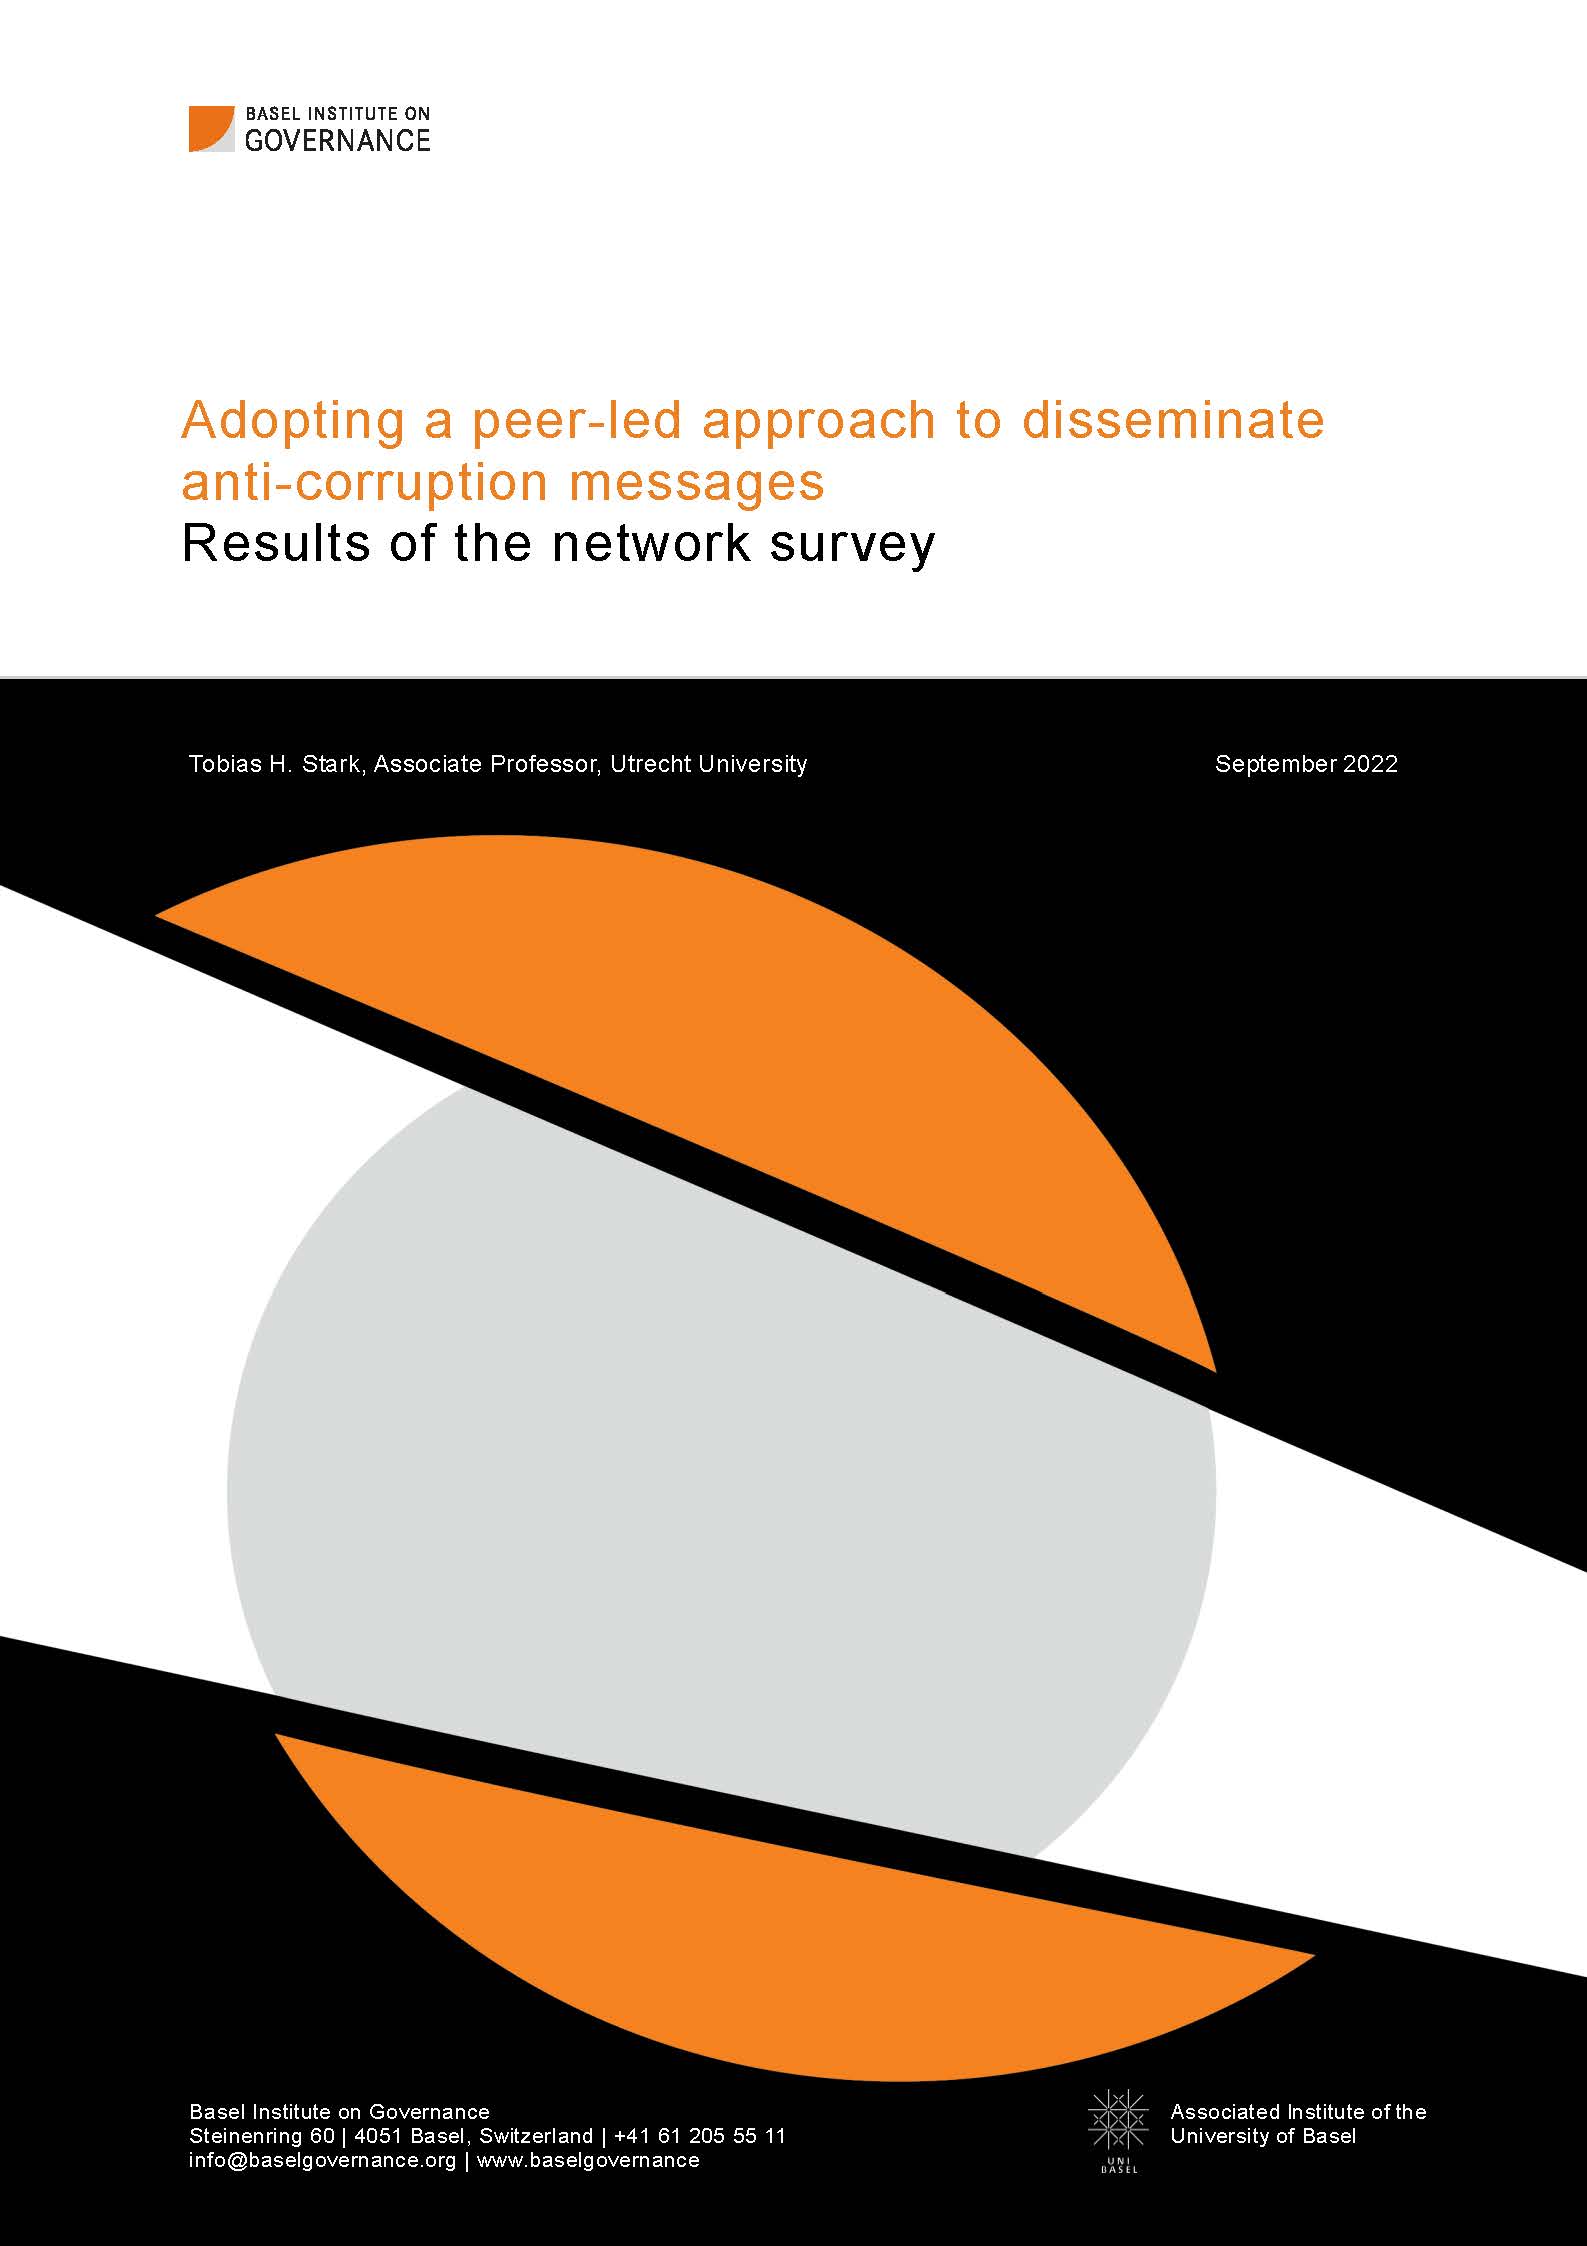 Cover page of network survey report